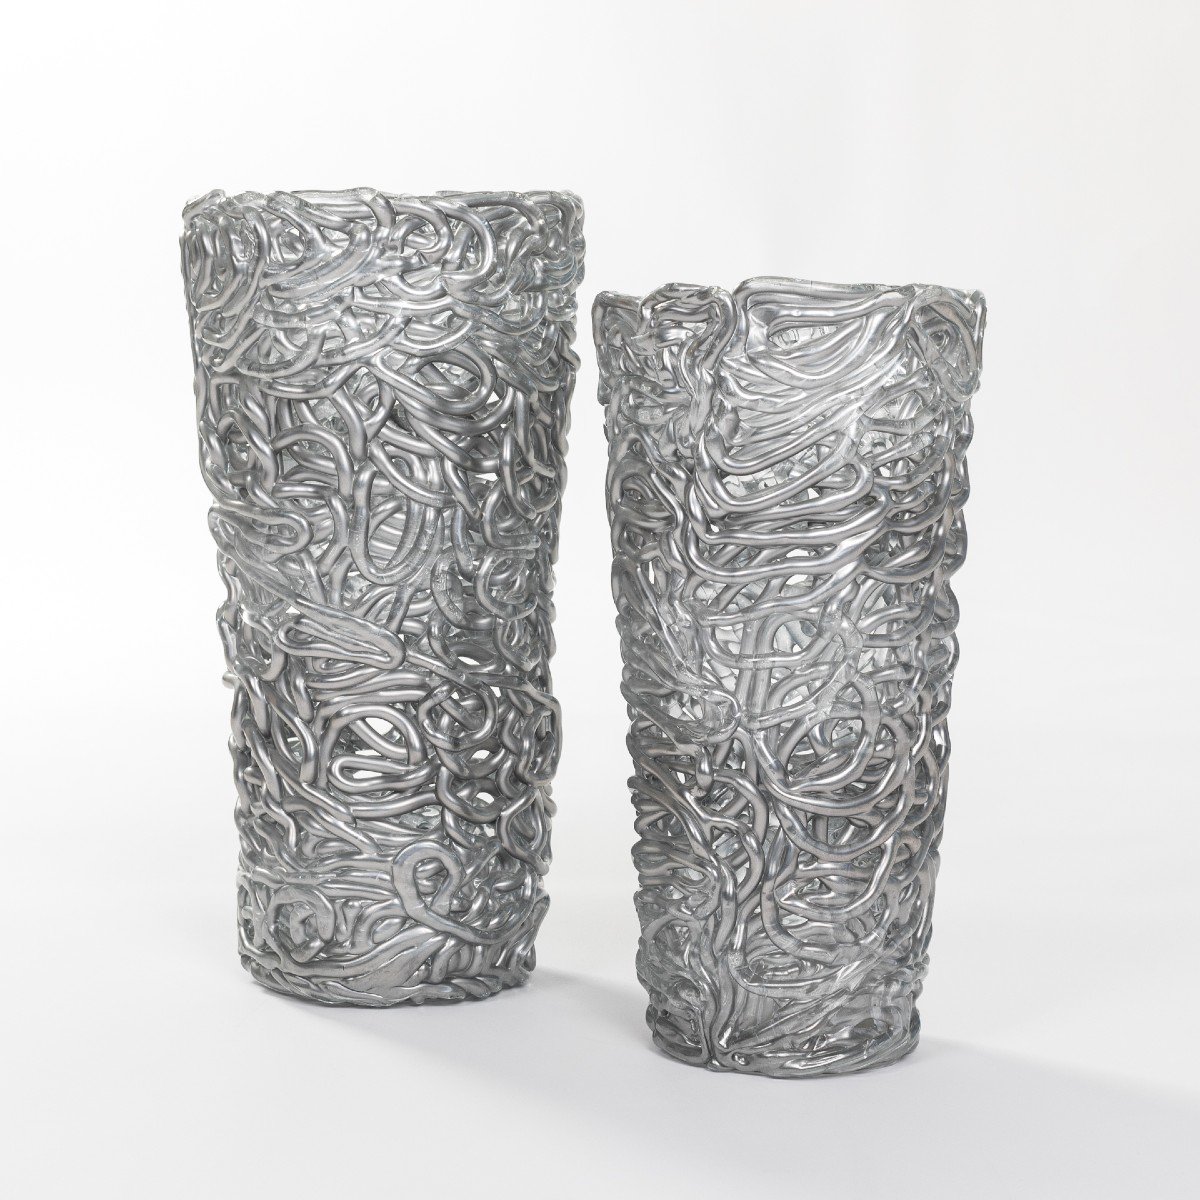 Pair Of Midcentury Silver-colored Murano Glass Vases Out Of Glass Veins